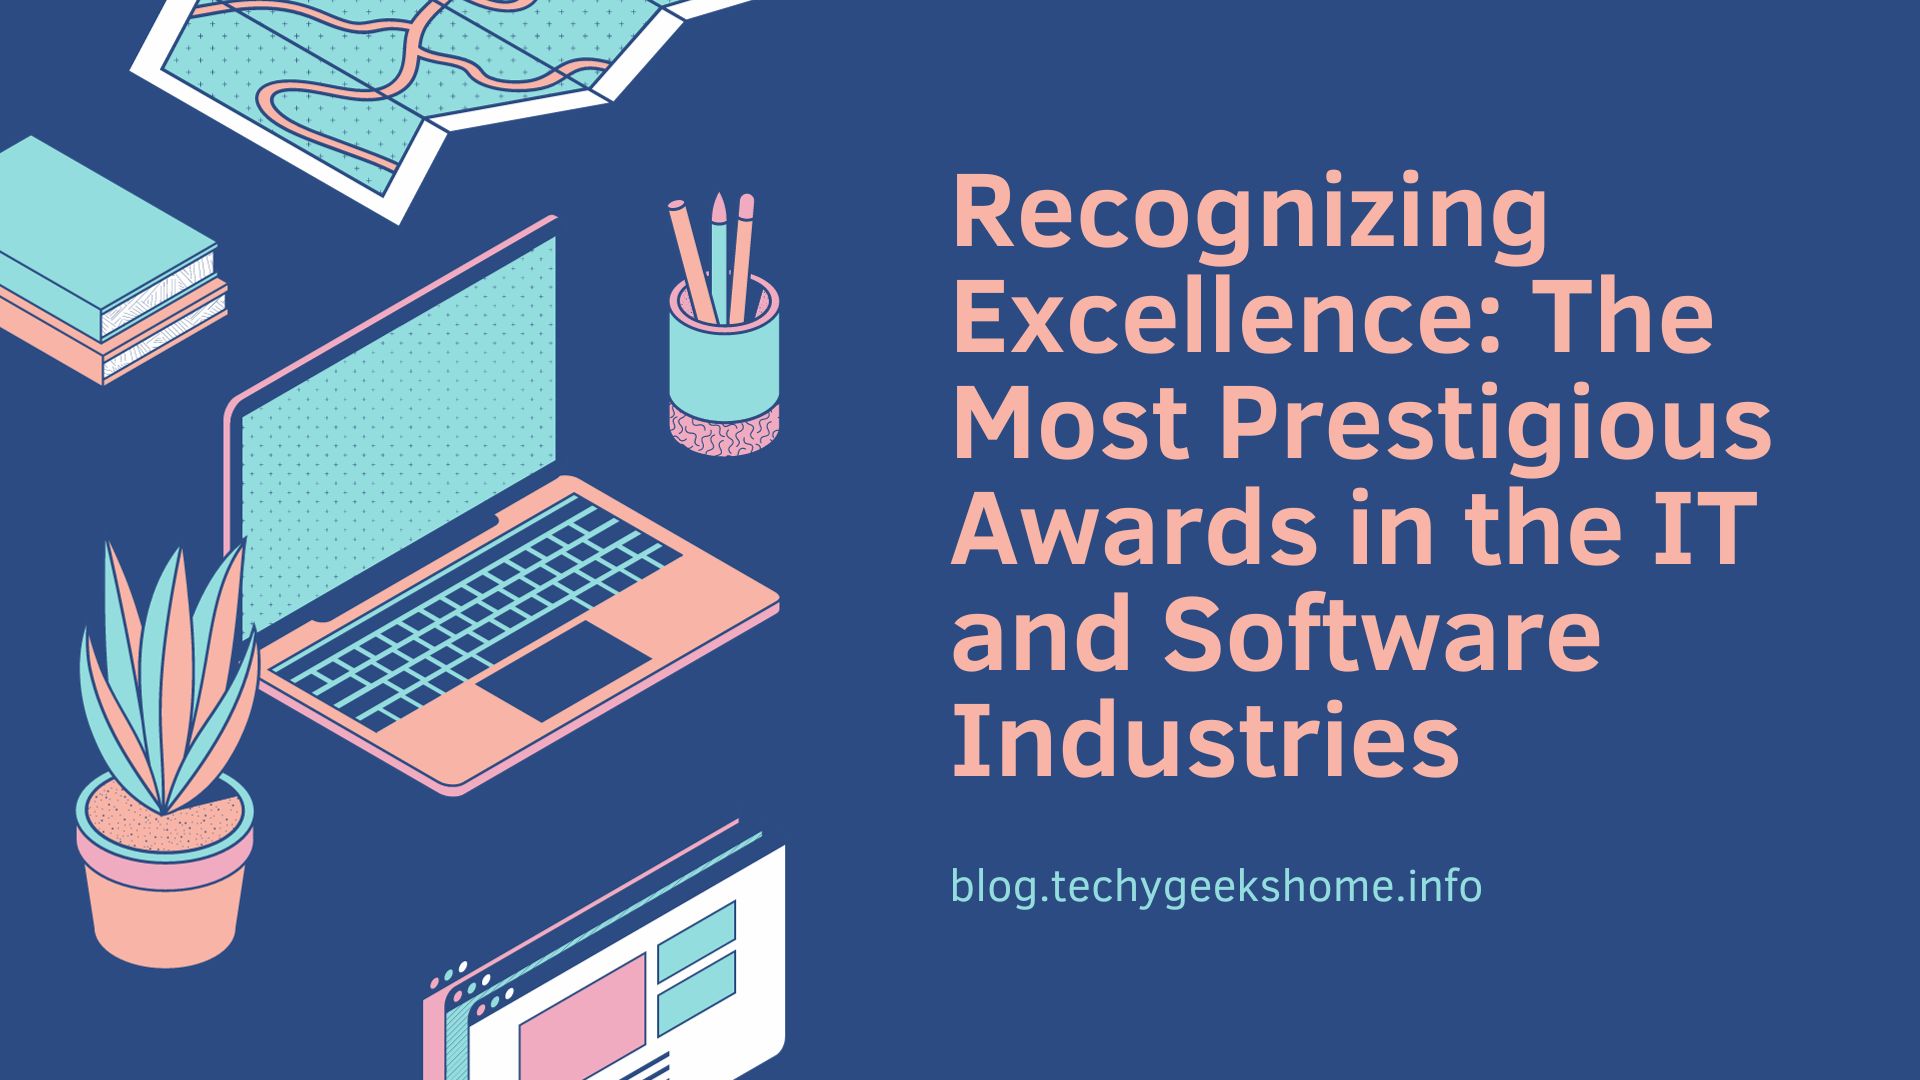 Recognizing Excellence: The Most Prestigious Awards in the IT and Software Industries